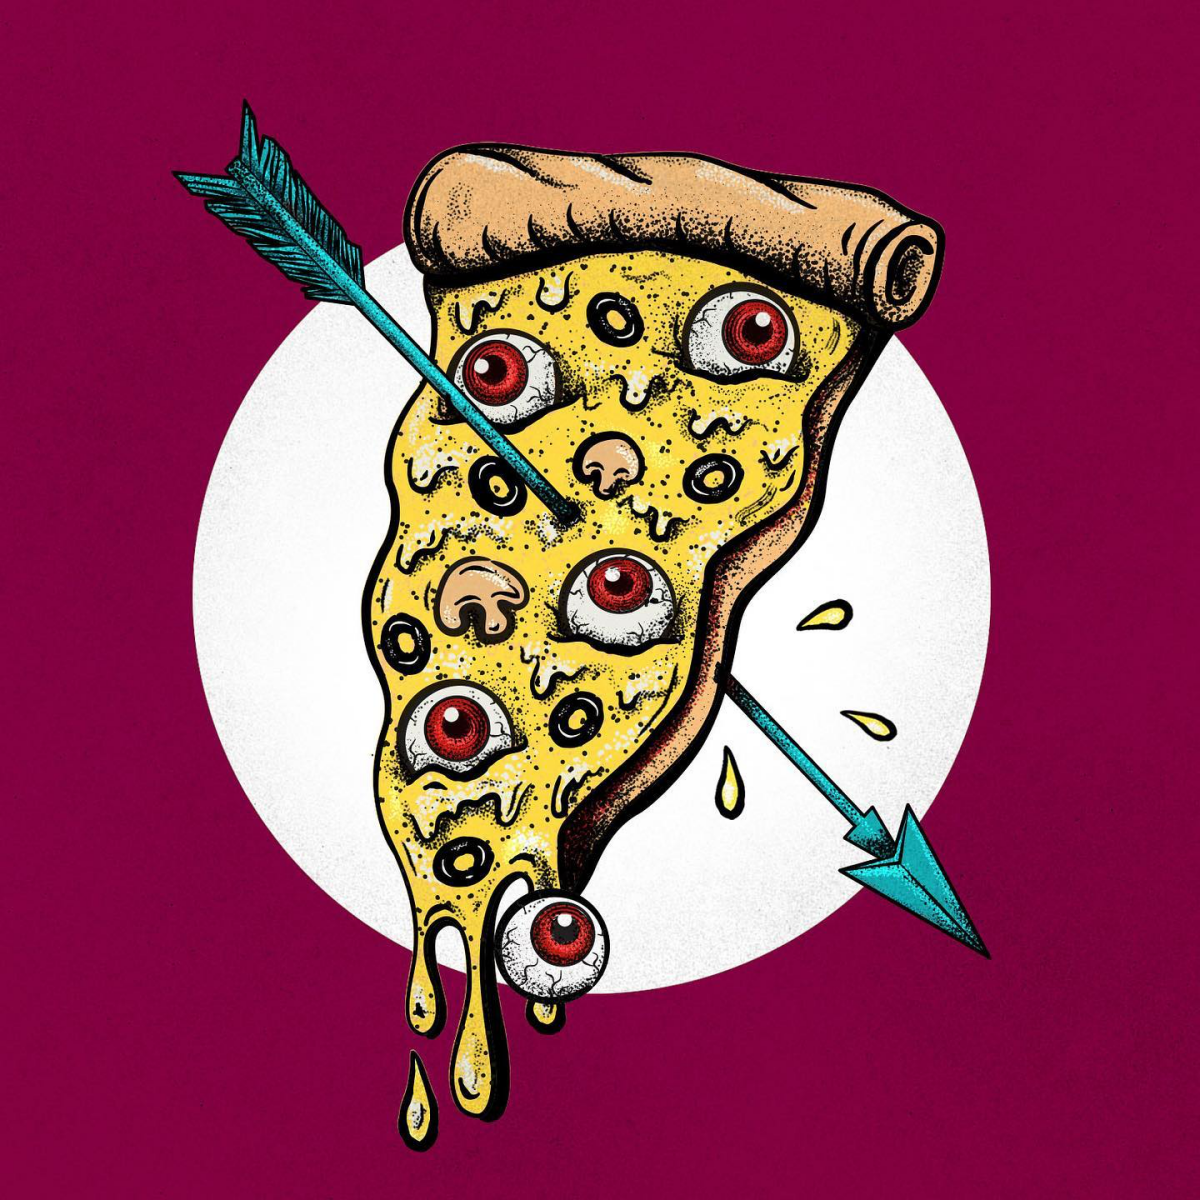 pizza slice with eyeballs as toppings